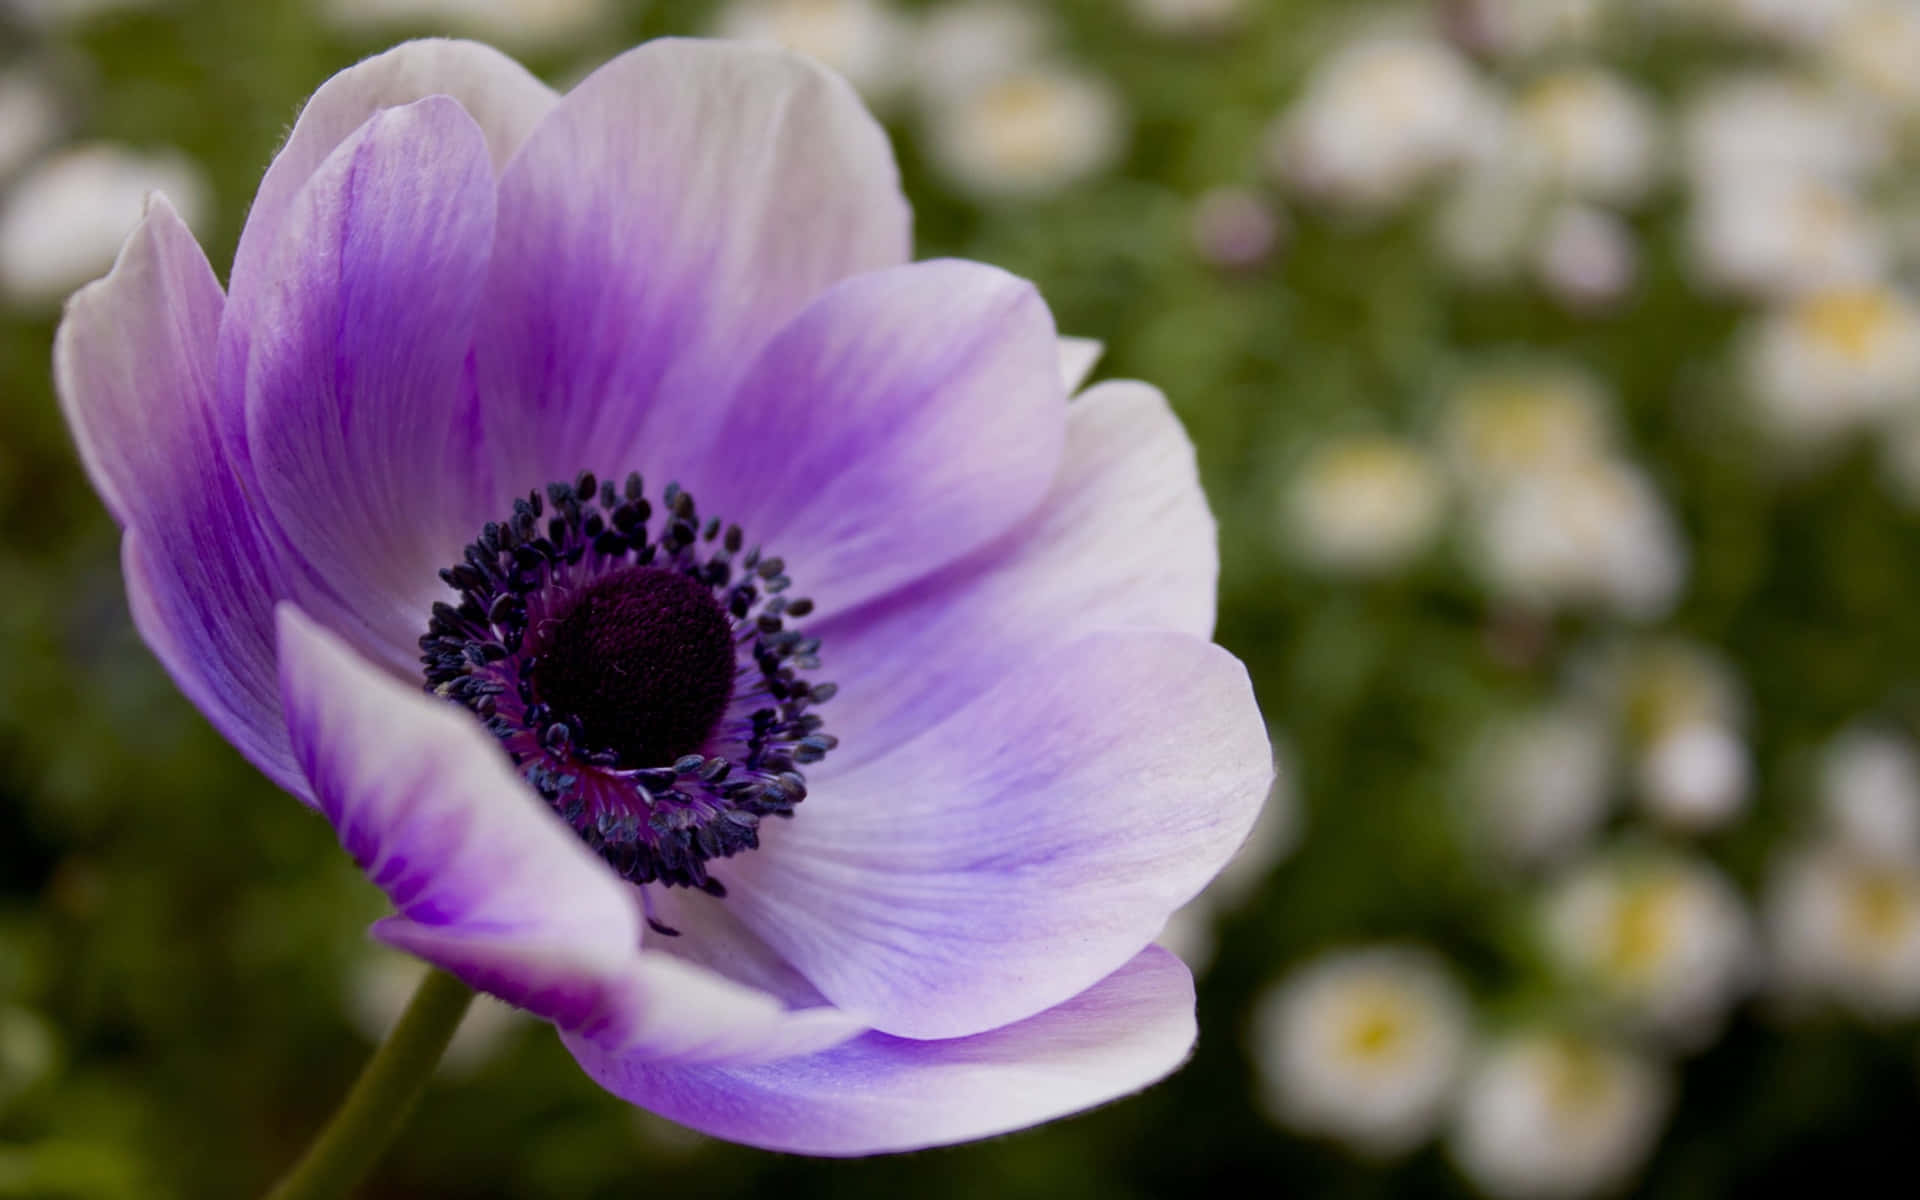 A beautiful Anemone flower standing bright and tall